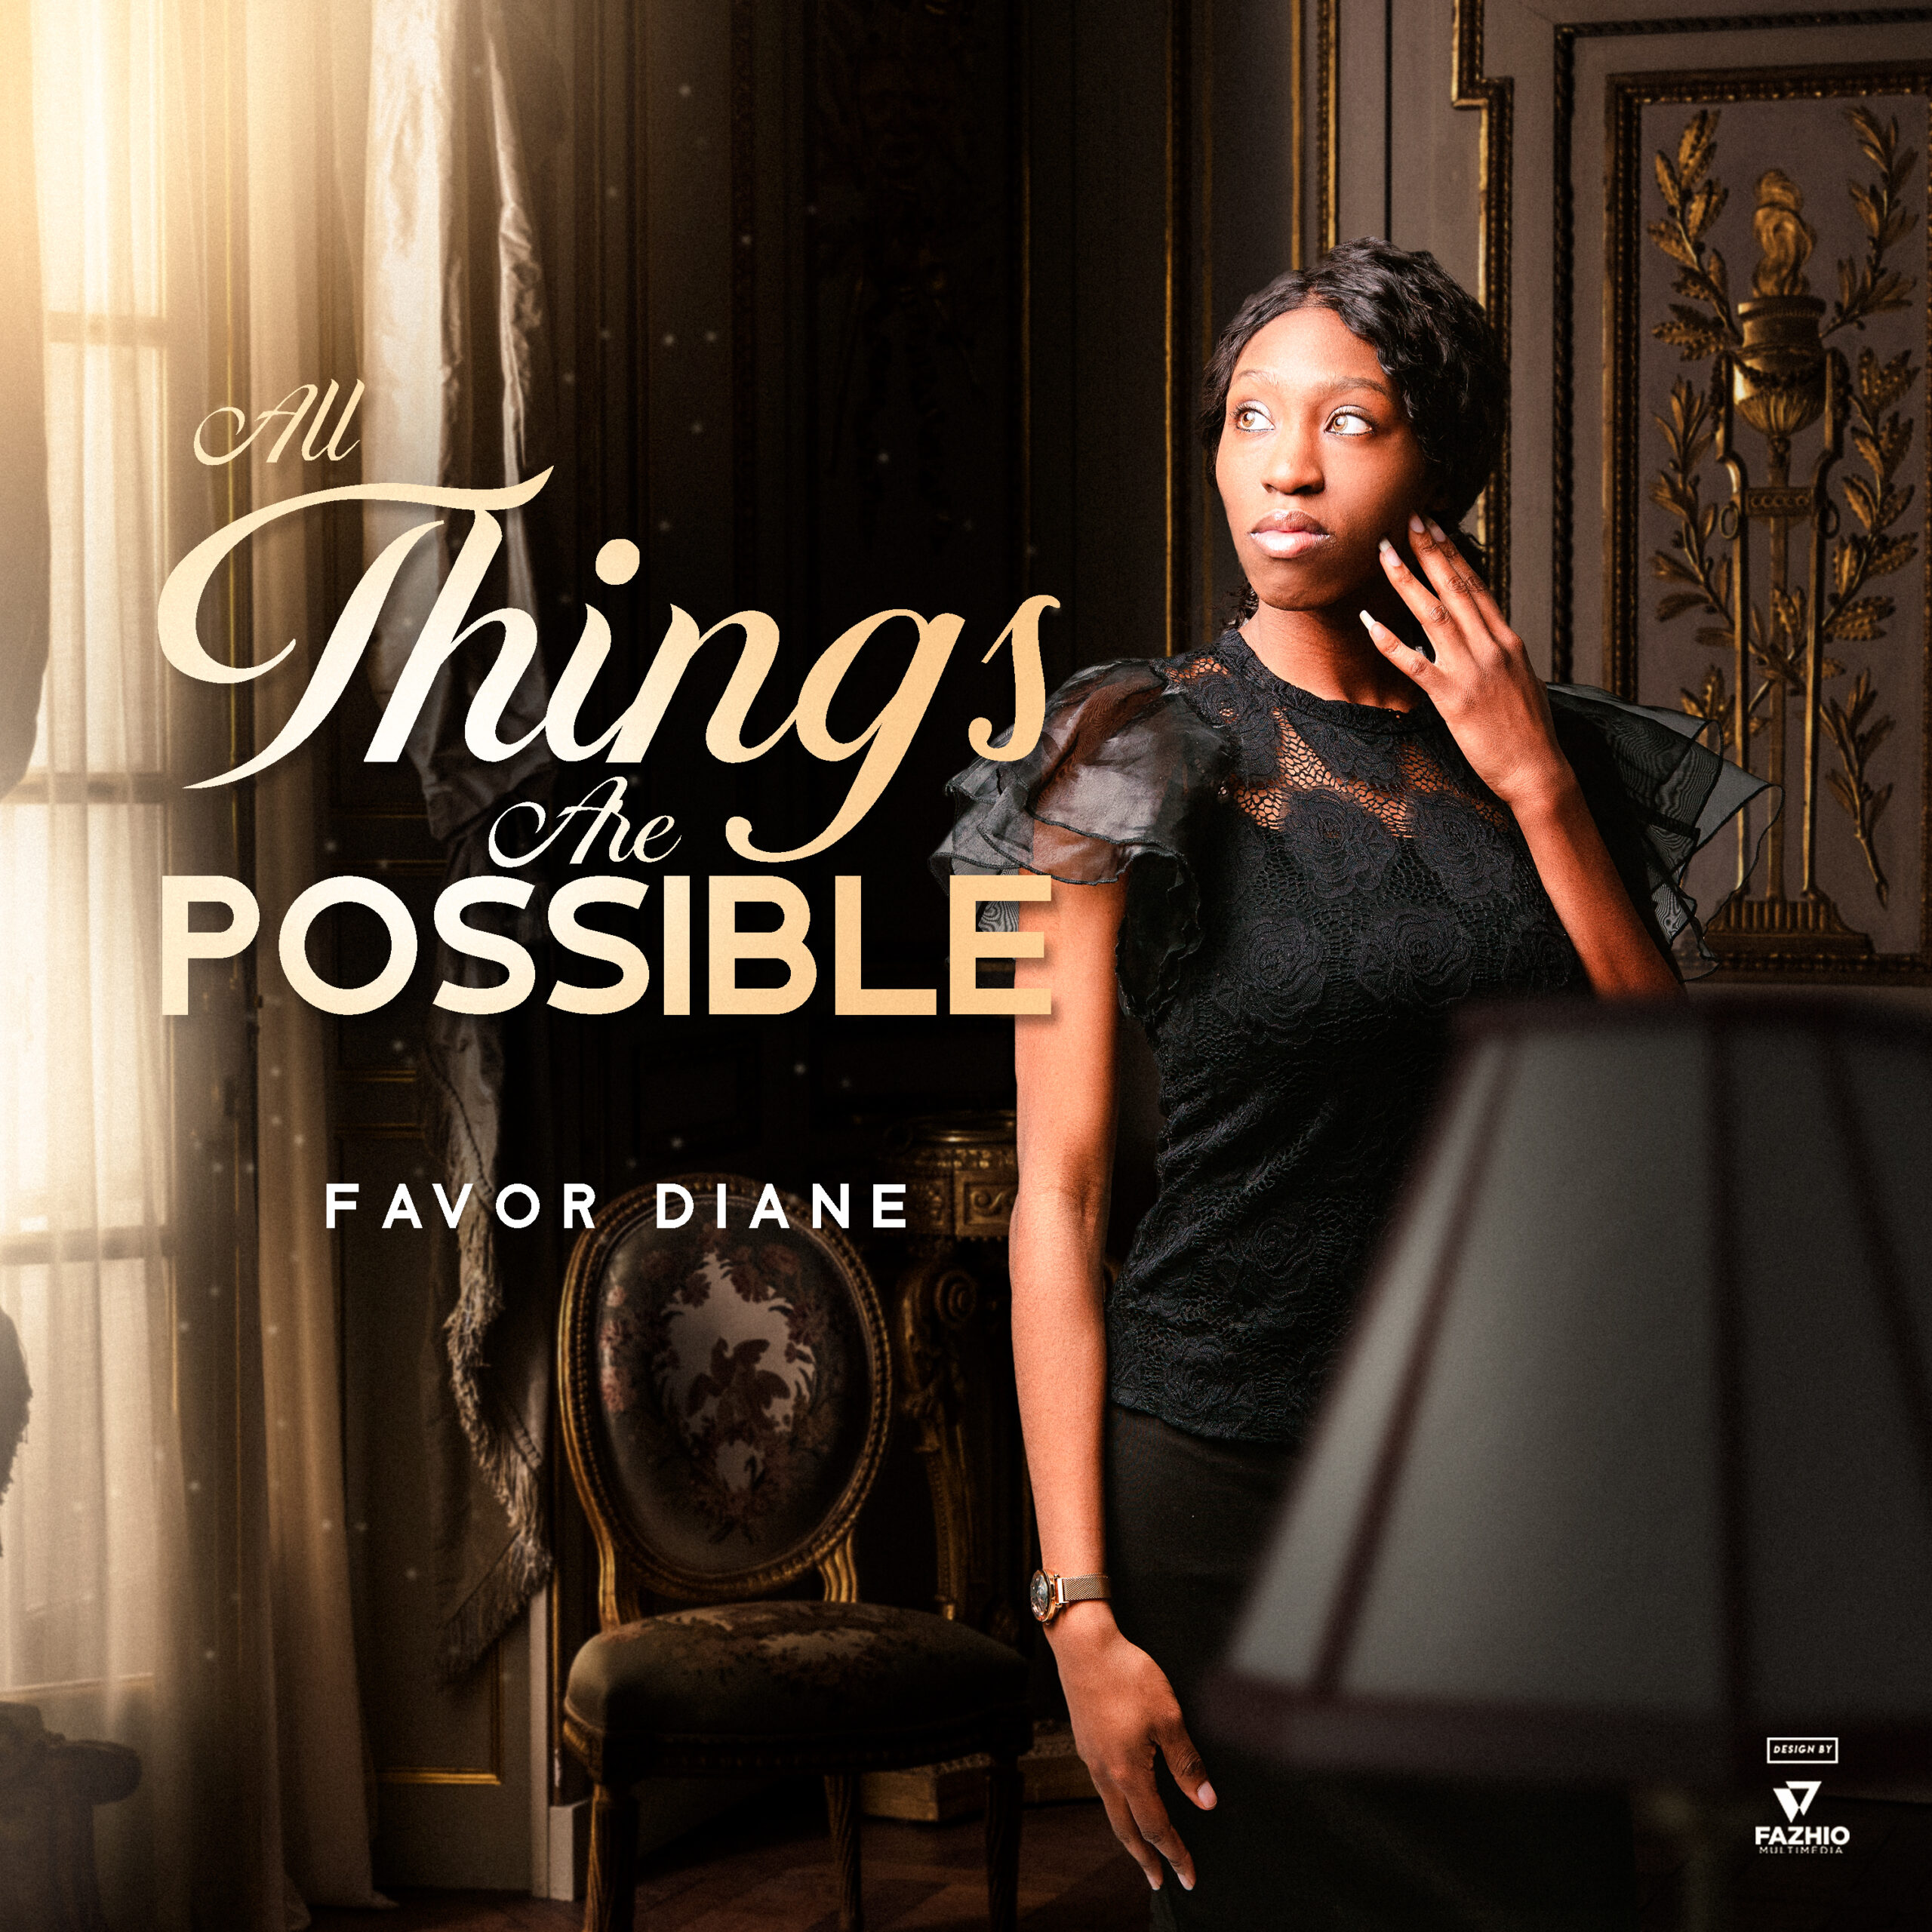 All Things Are Possible – Favor Diane